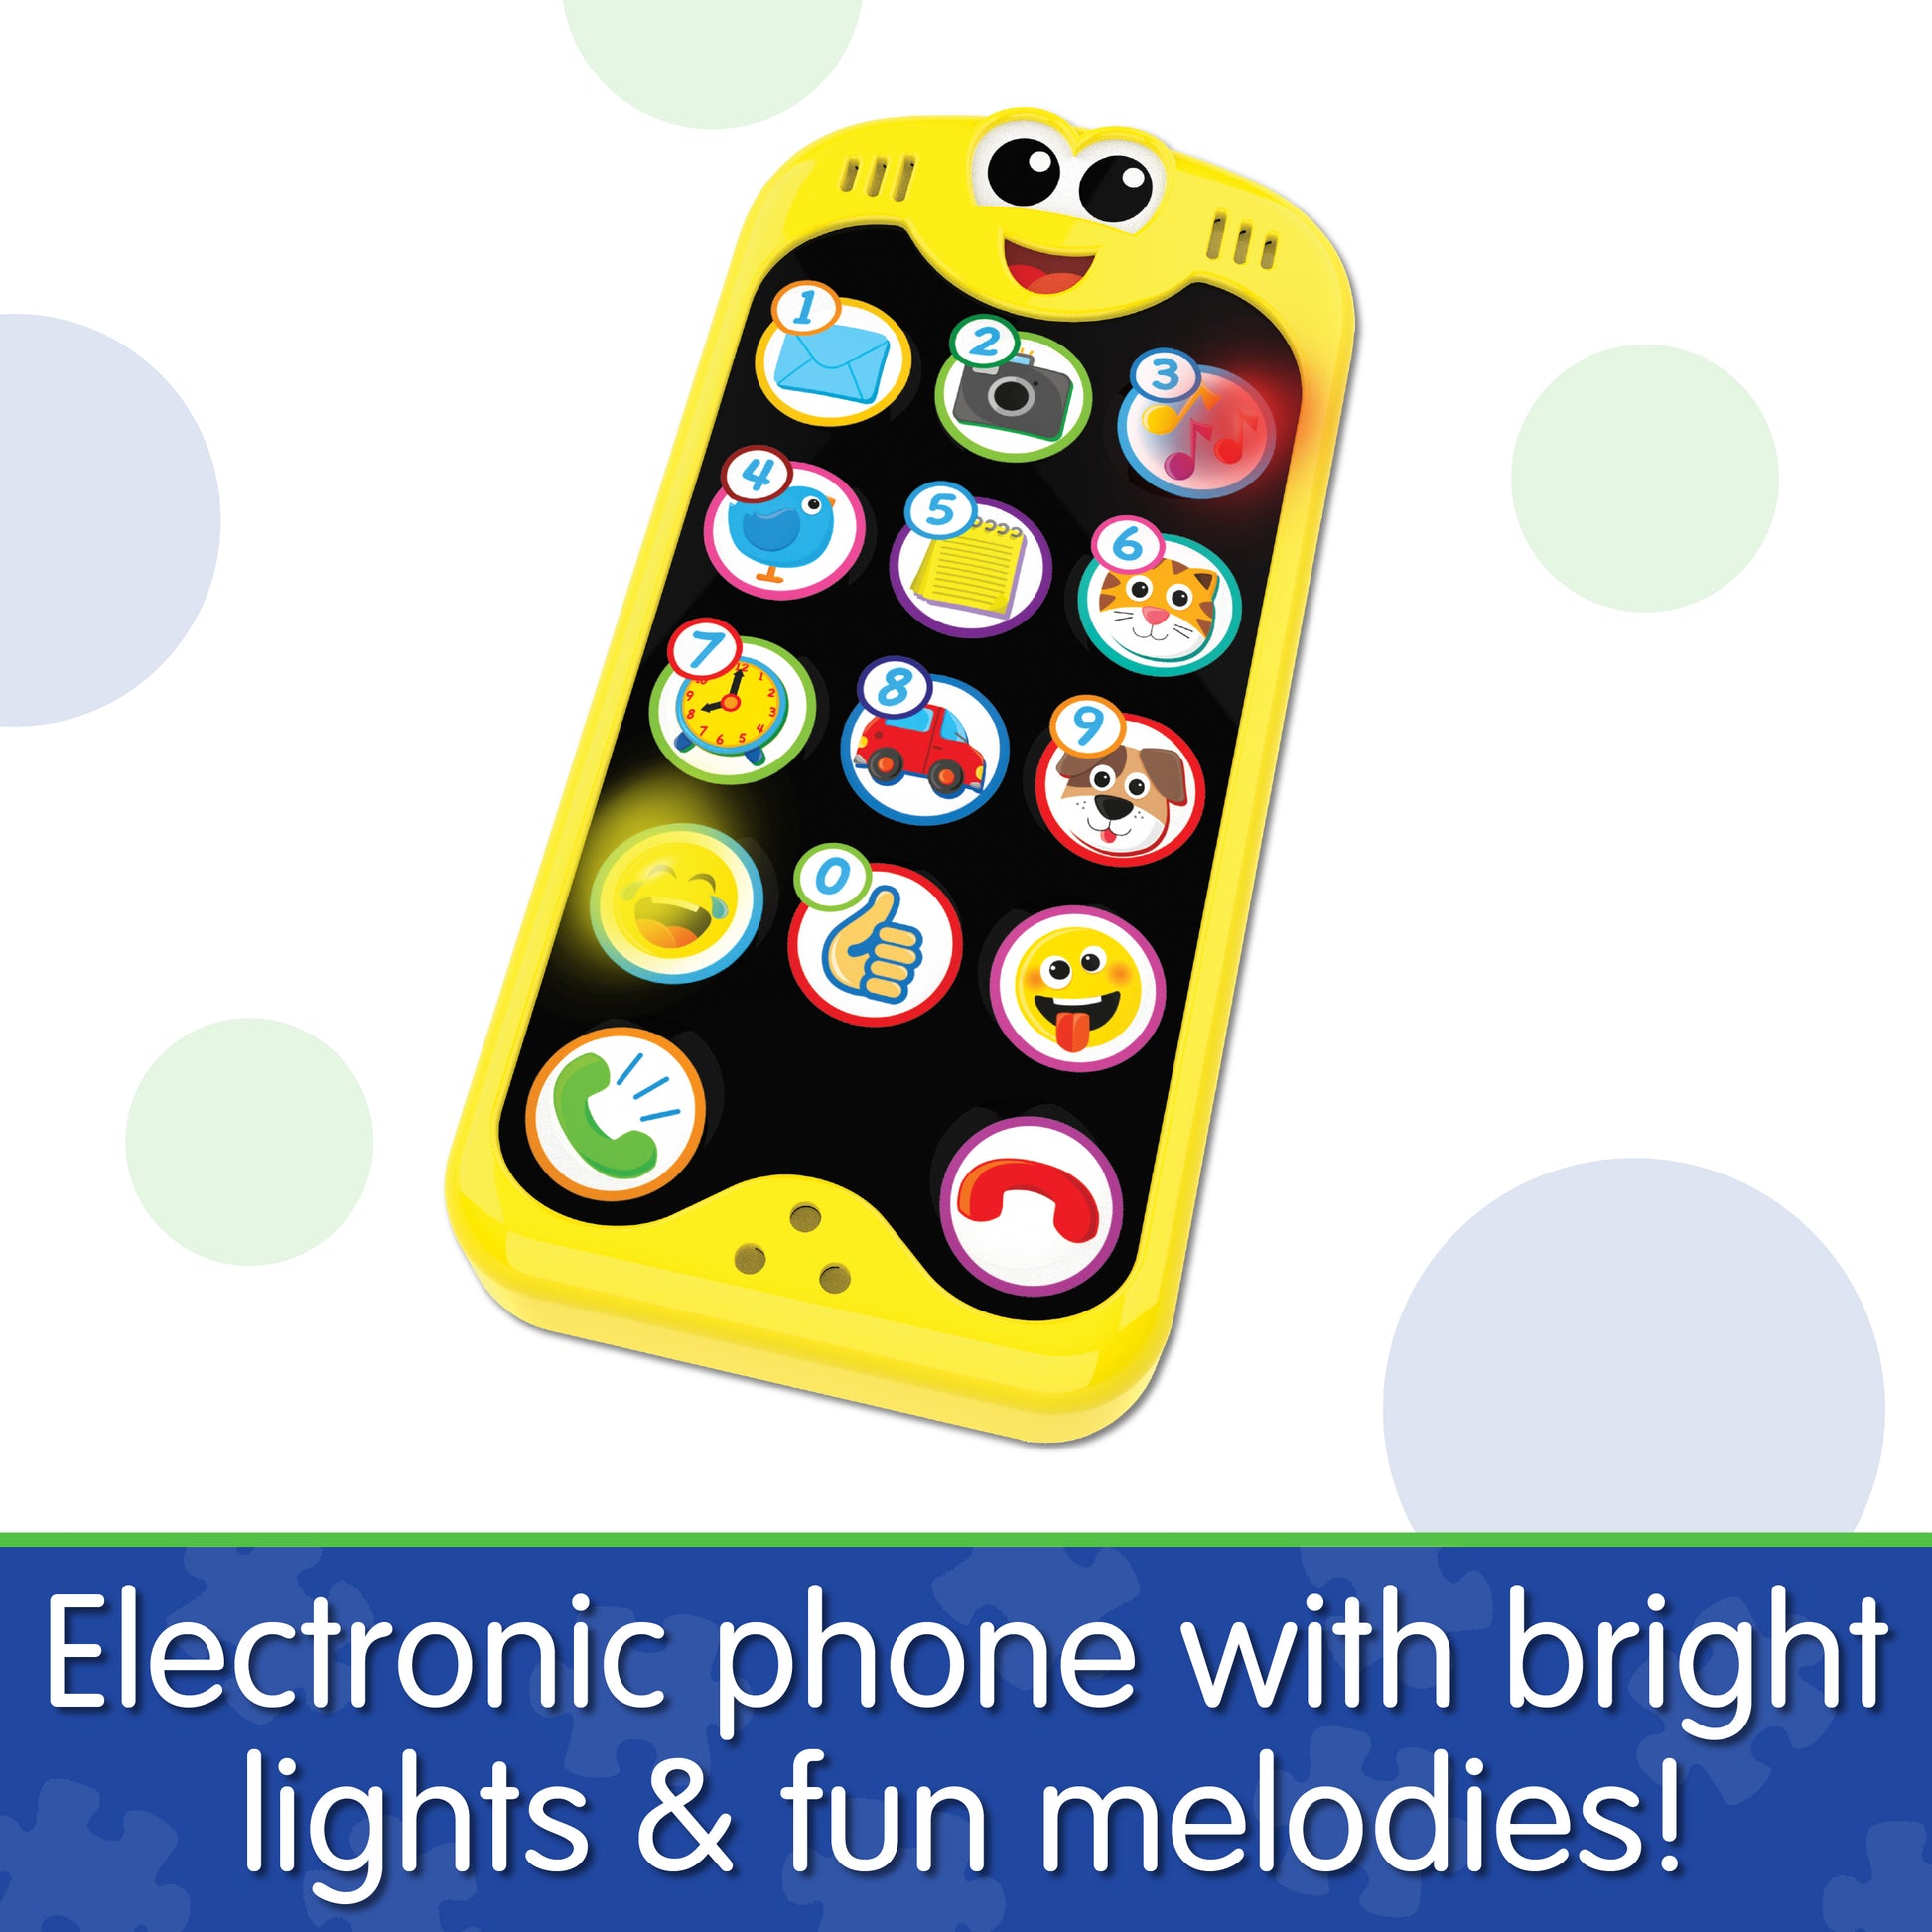 Infographic about On The Go Phone that says, "Electronic phone with bright lights and fun melodies!"